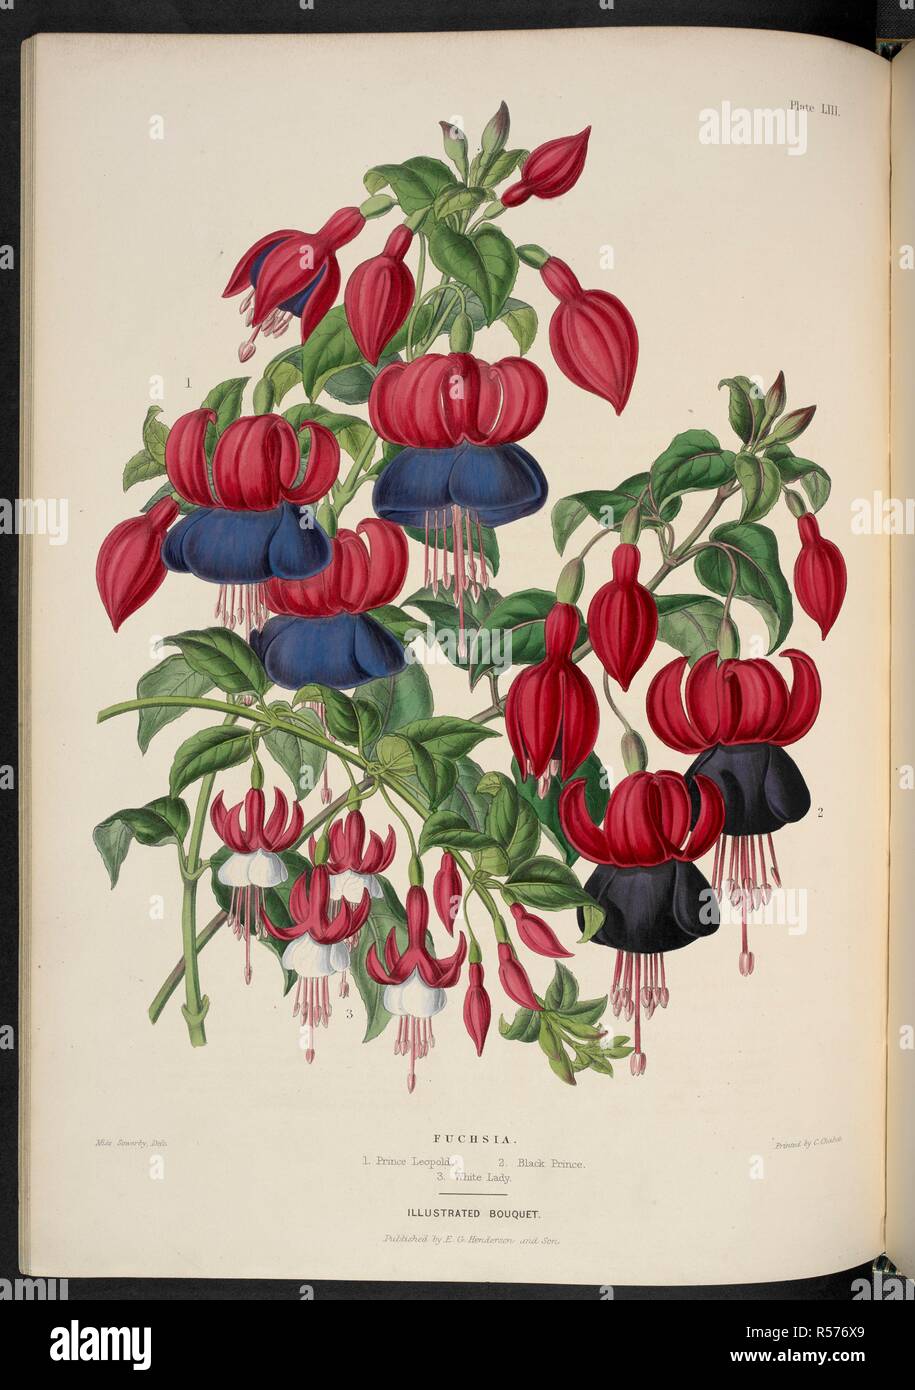 New Fuchsias. Fuchsia. 1. Prince Leopold; 2. Black Prince; 3. White Lady. The Illustrated Bouquet, consisting of figures, with descriptions of new flowers. London, 1857-64. Source: 1823.c.13 plate 53. Author: Henderson, Edward George. Sowerby, Miss. Stock Photo